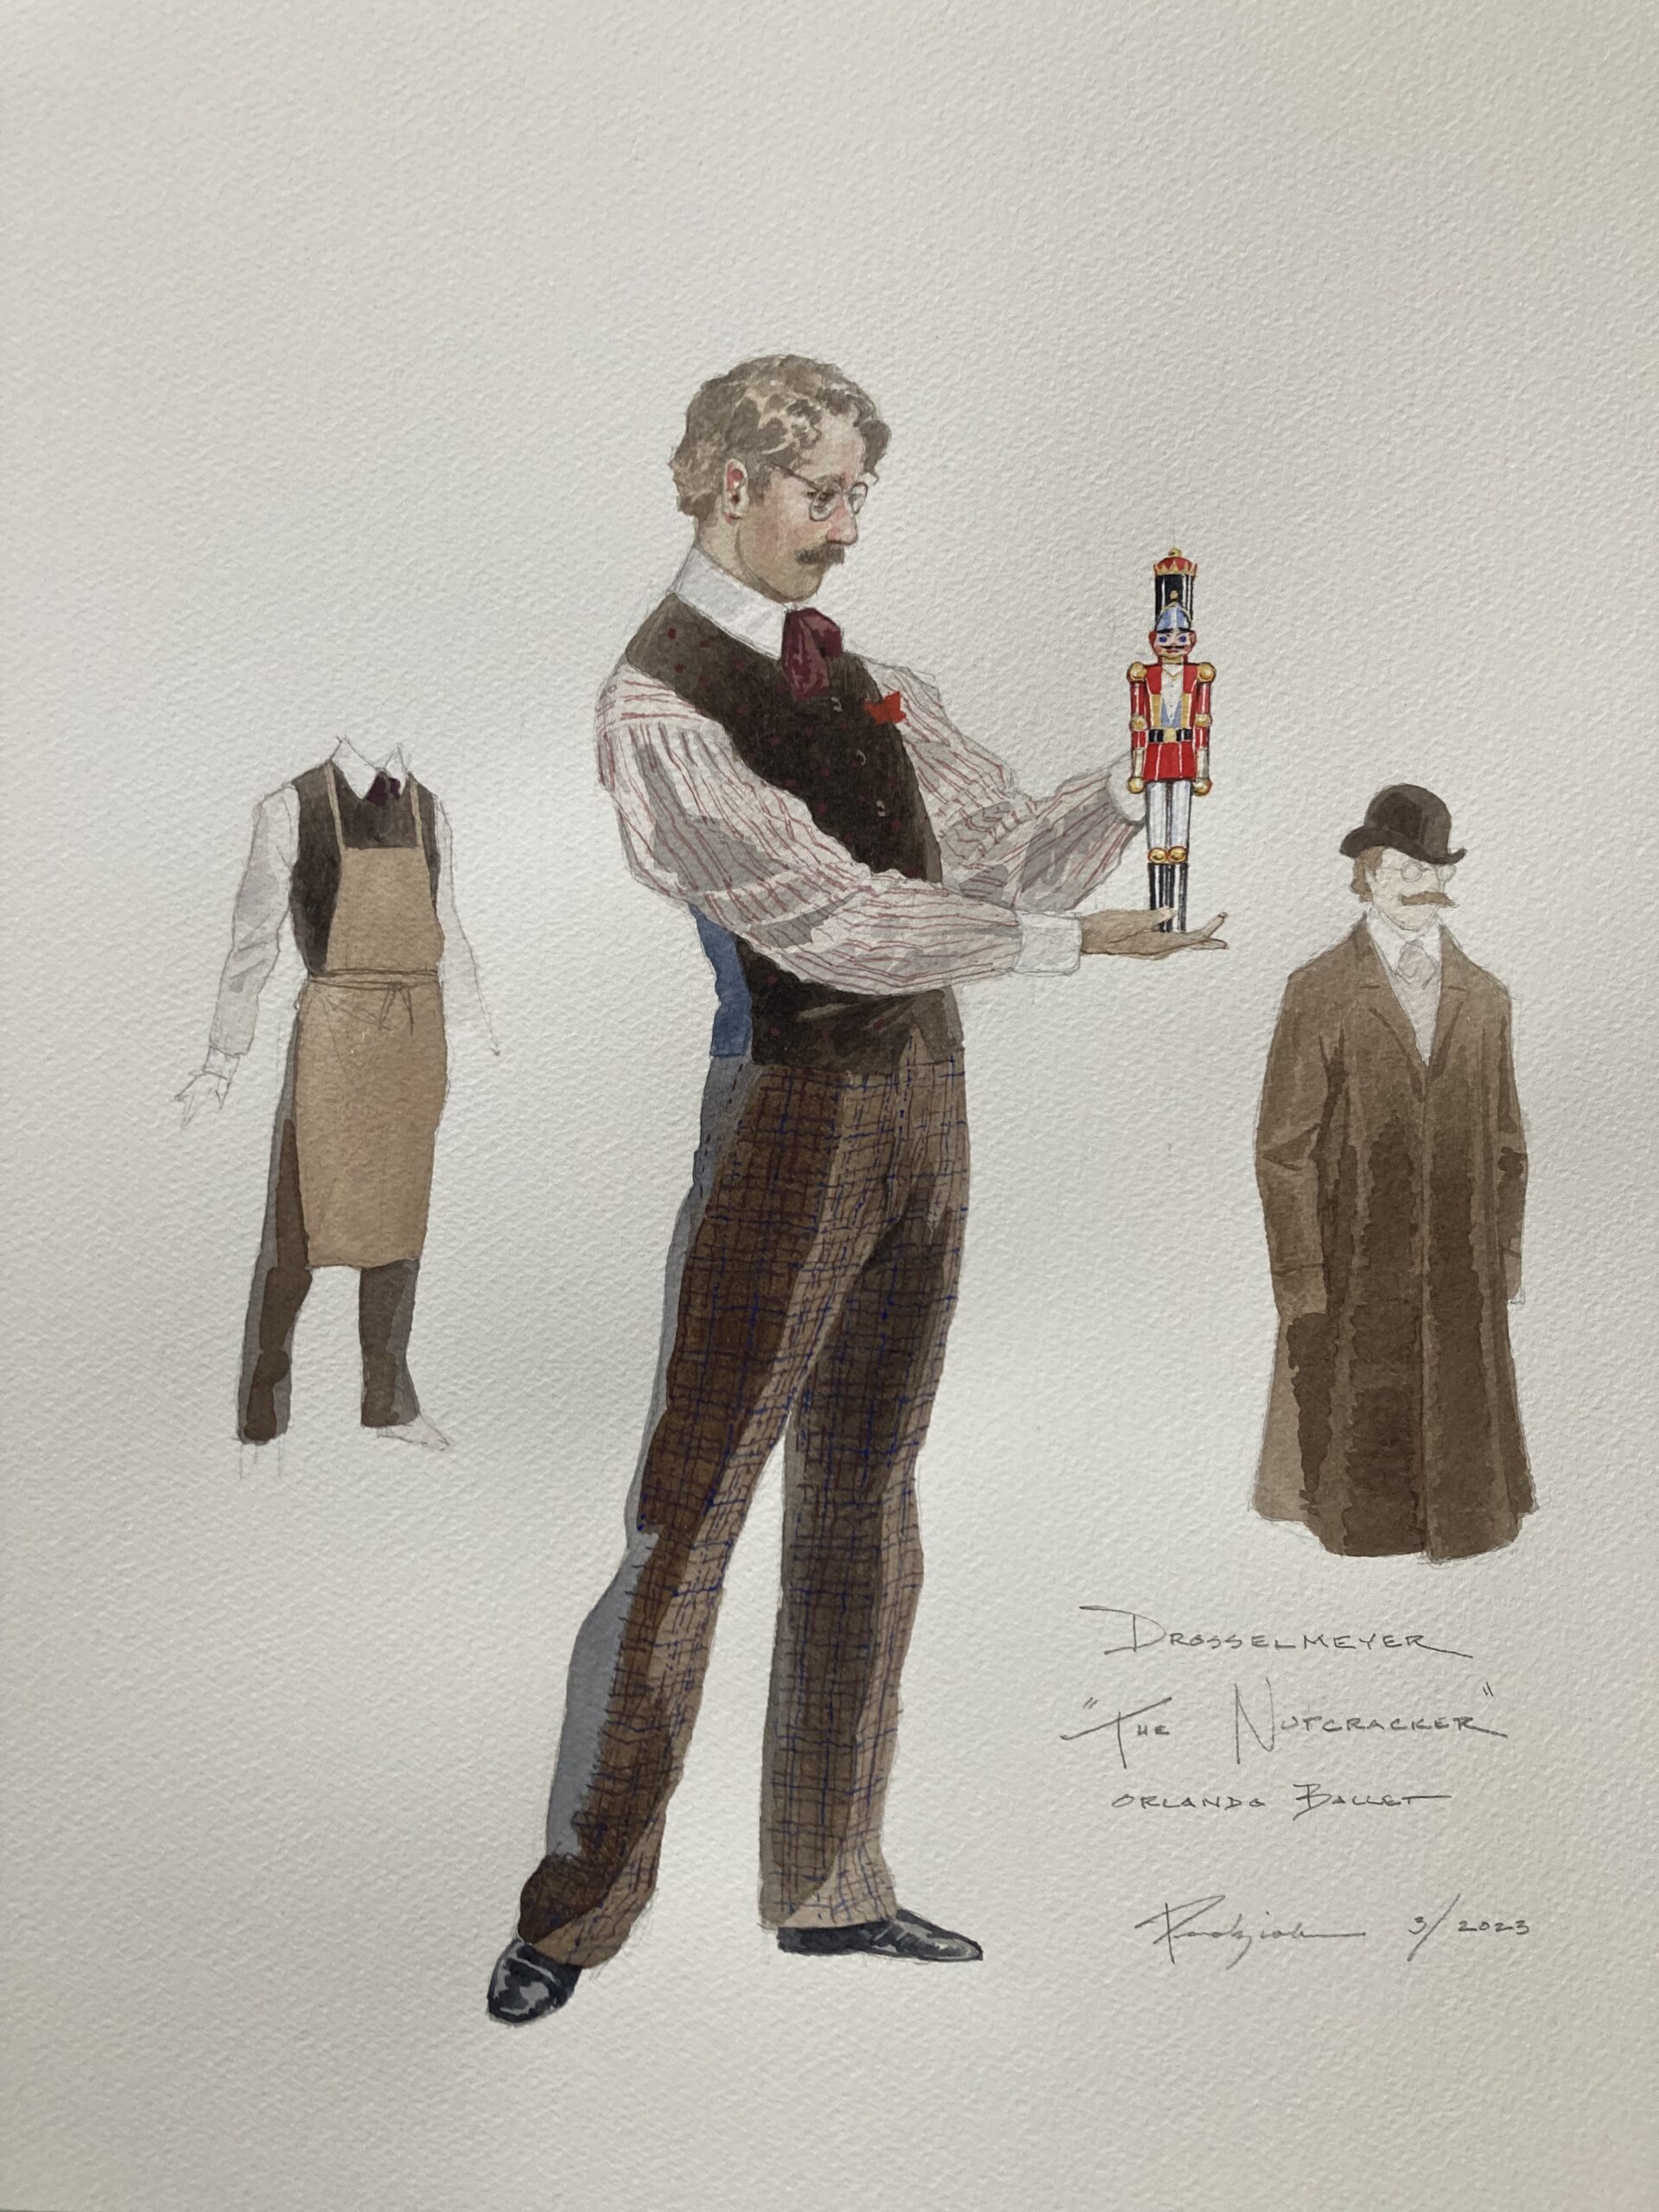 A sketch on paper in pen and watercolor shows for the design for a new Drosselmeyer costume.